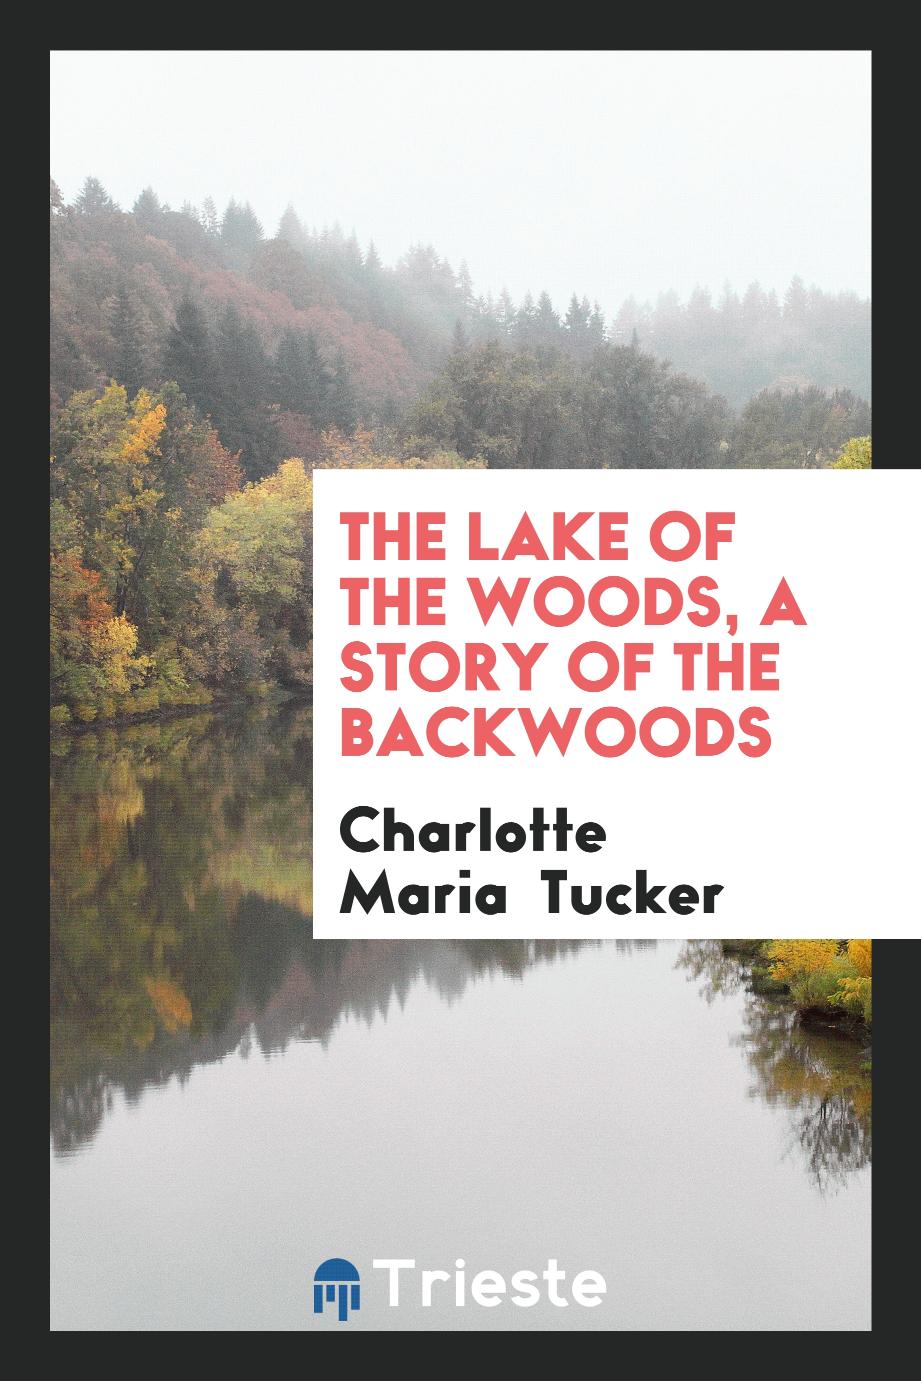 The lake of the woods, a story of the backwoods